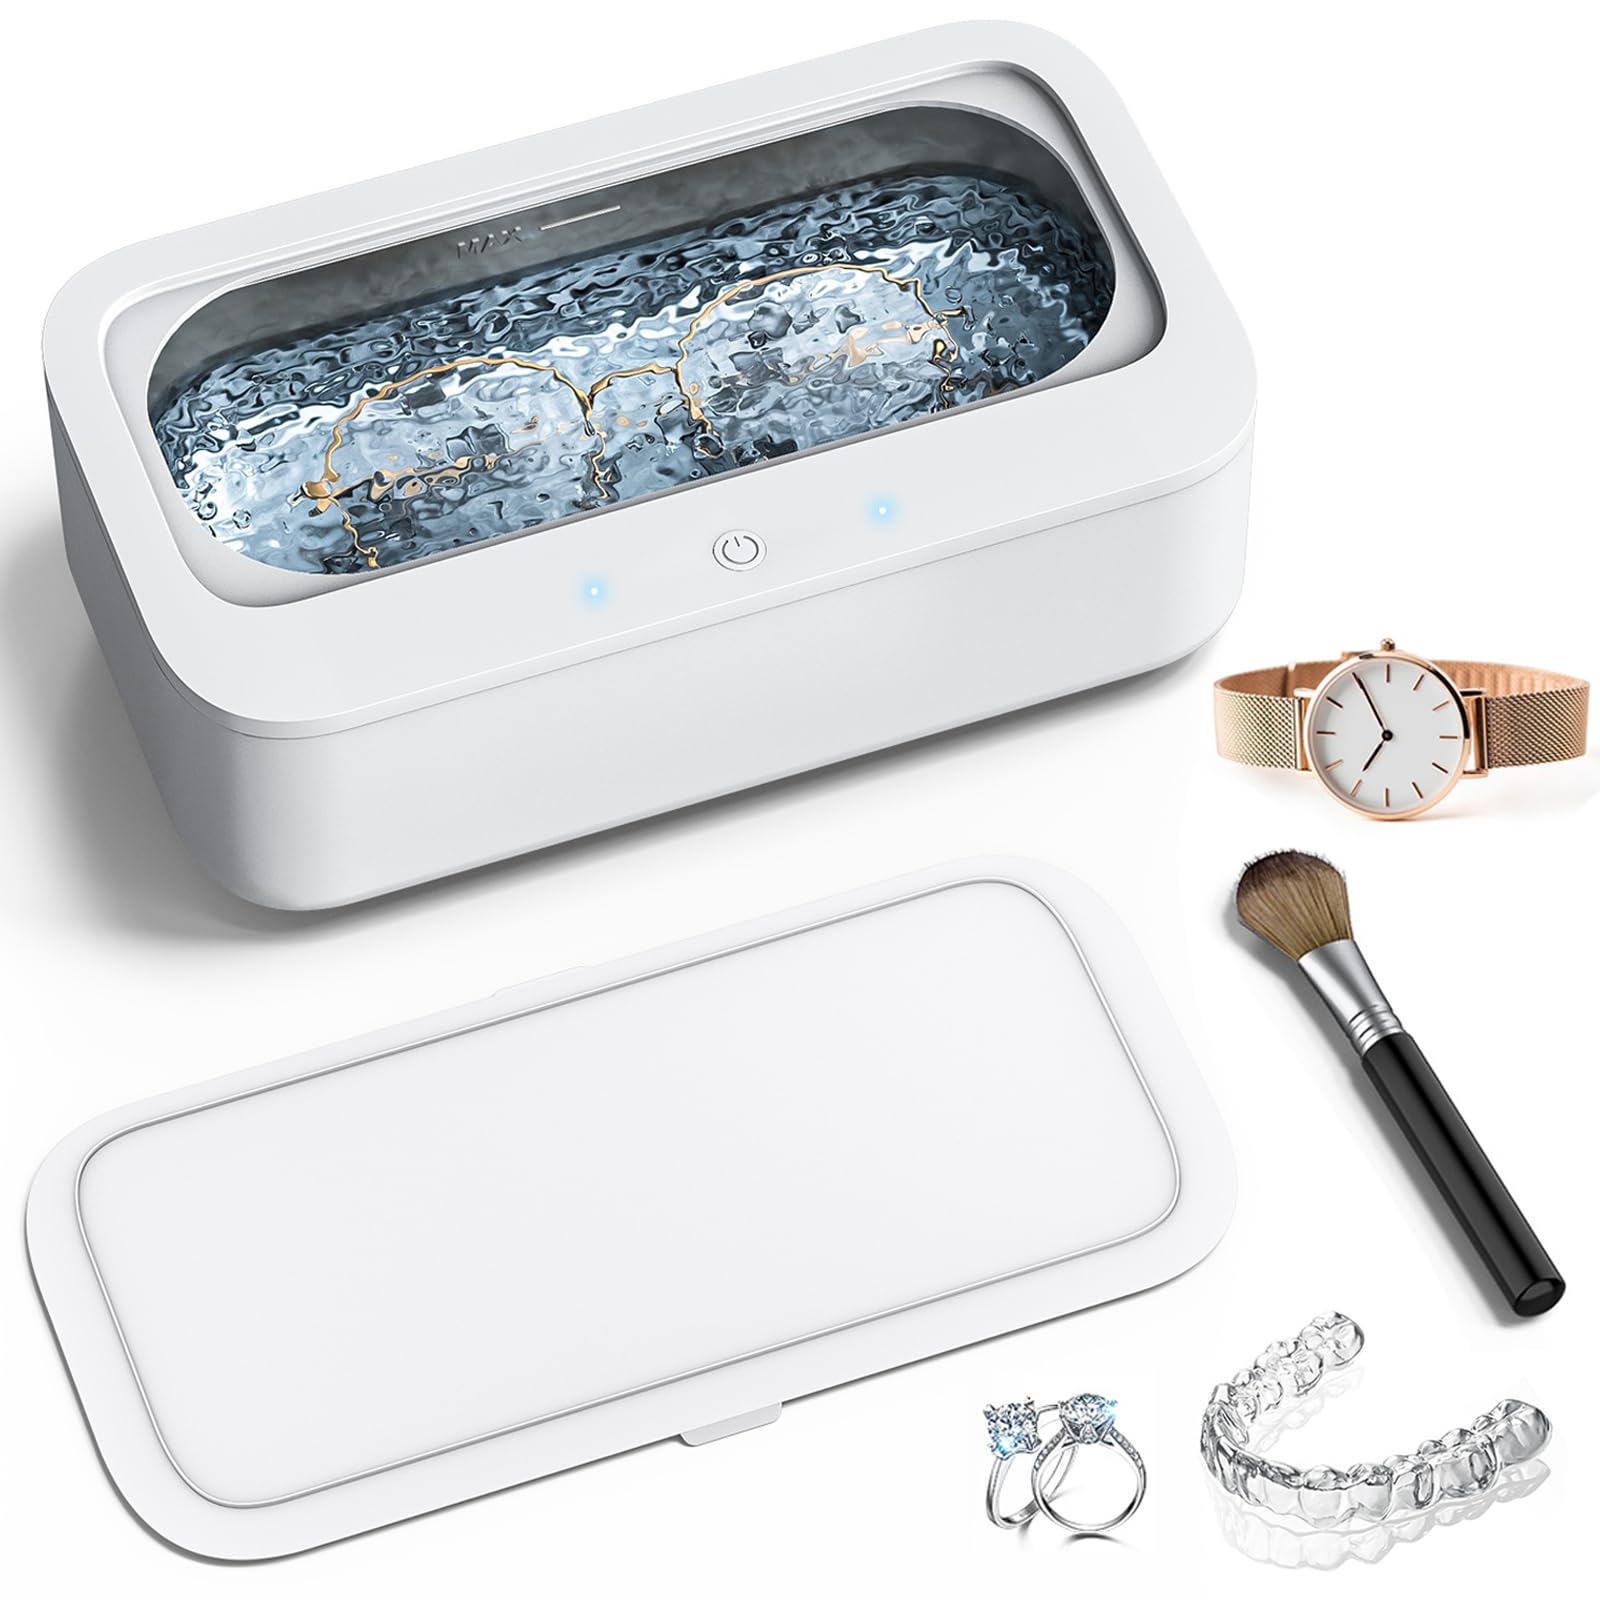 Book Cover Ultrasonic Jewelry Cleaner Dental Pod-Deep Cleaning Machine 45Khz Ultrasonic Cleaner, Cleaning Stainless Steel 304 High Capacity 350ML Tank, Silver Cleaner for Ring, Earing, Glasses, Watches, Coins Upgraded Pro 350mL